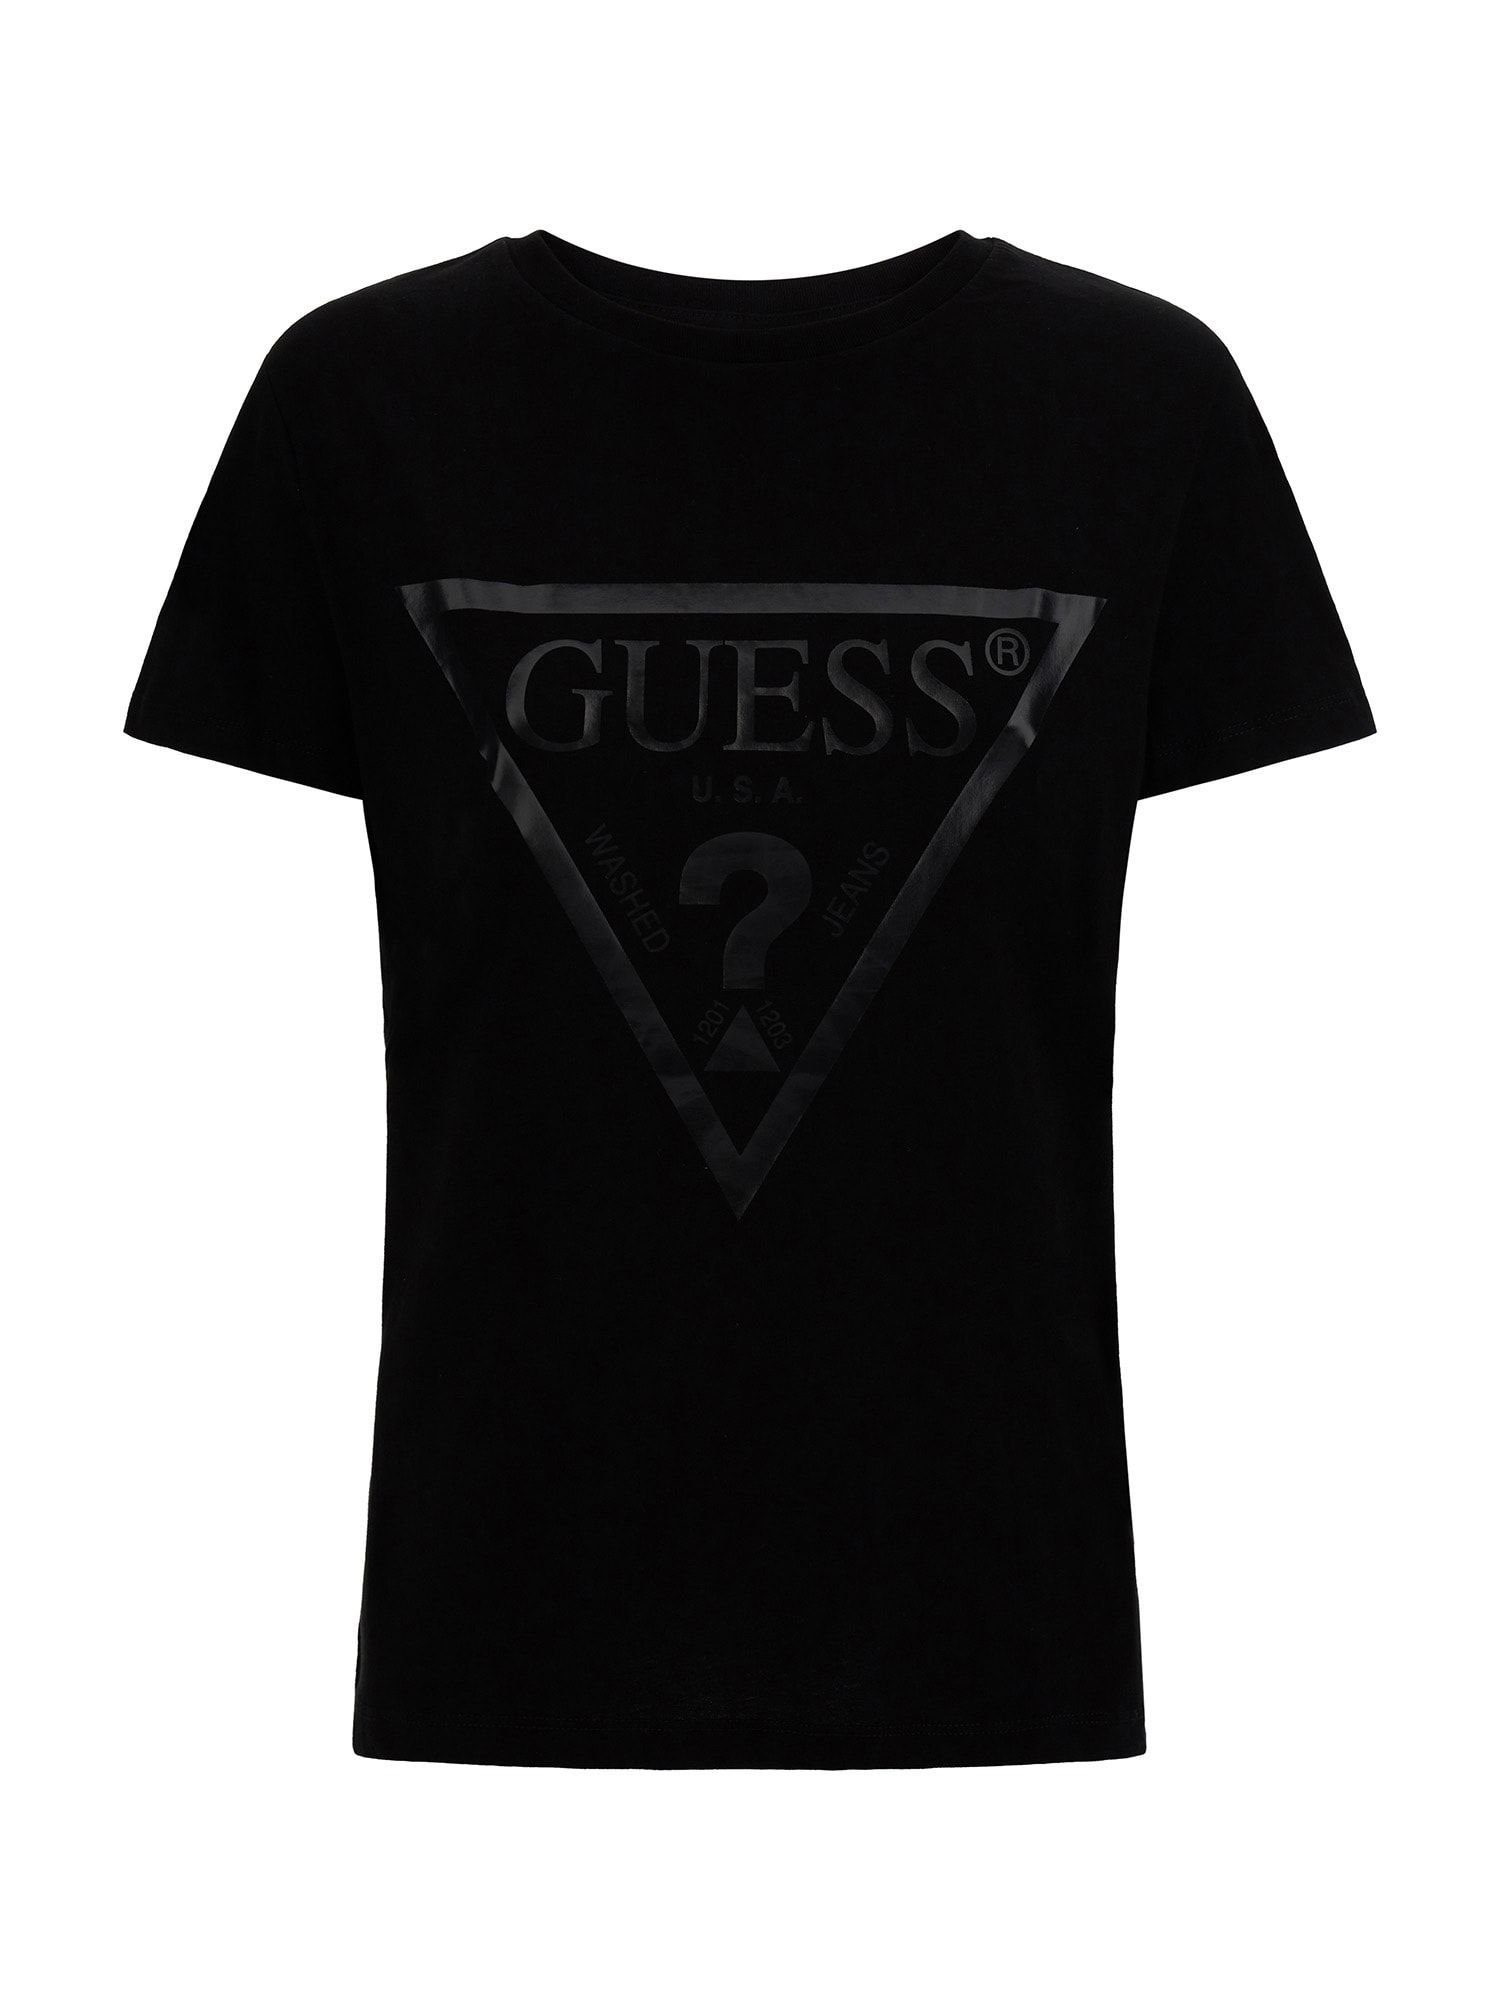 Guess Collection T-Shirt Jet Black A996